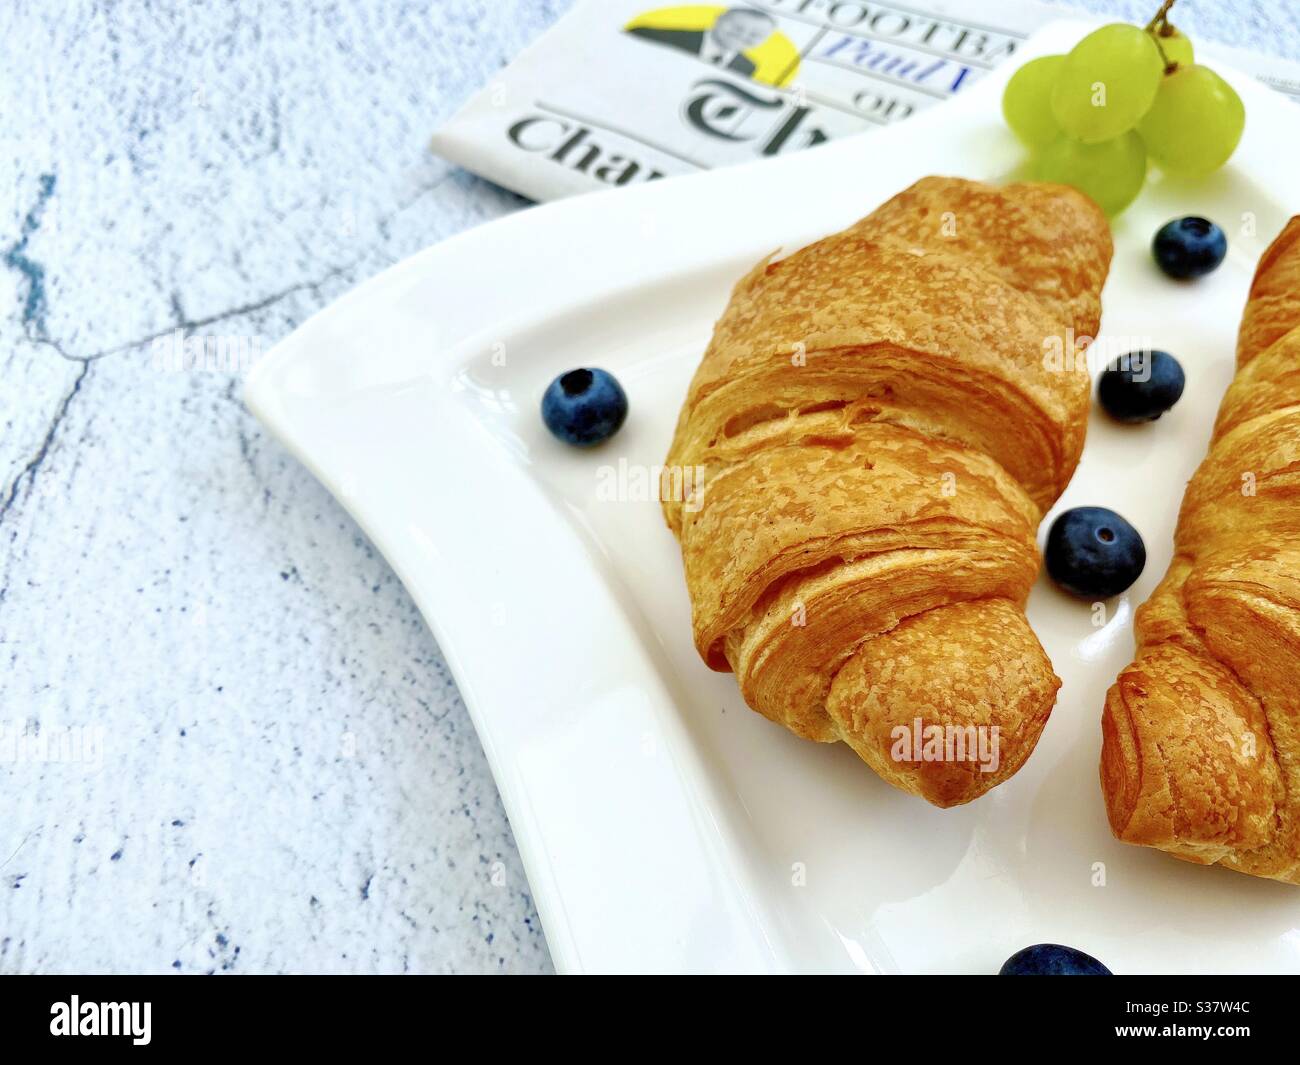 Closeup view of freshly baked croissants on a white plate with blueberries and grapes. Tasty breakfast with morning newspaper on a natural granite stone table. Stock Photo